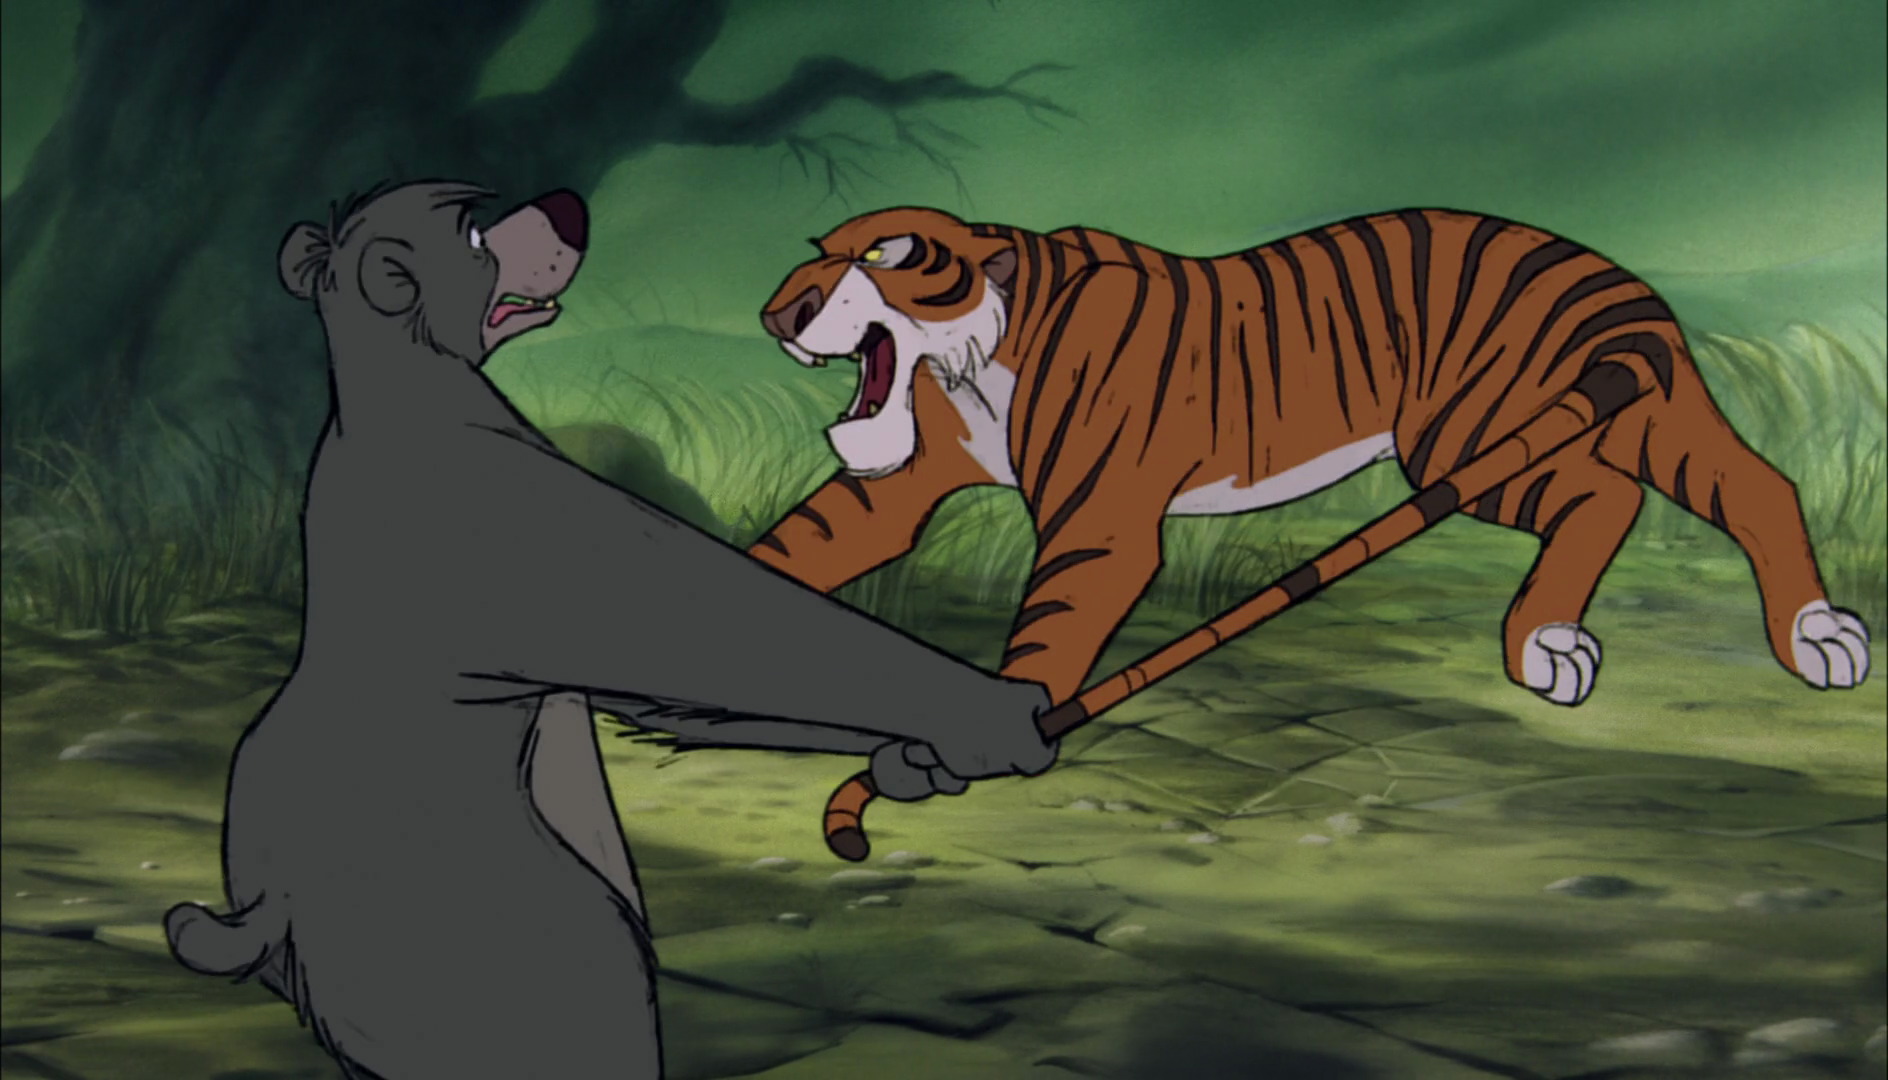 Shere Khan the Tiger is trying to Baloo the Bear to let go of his tail